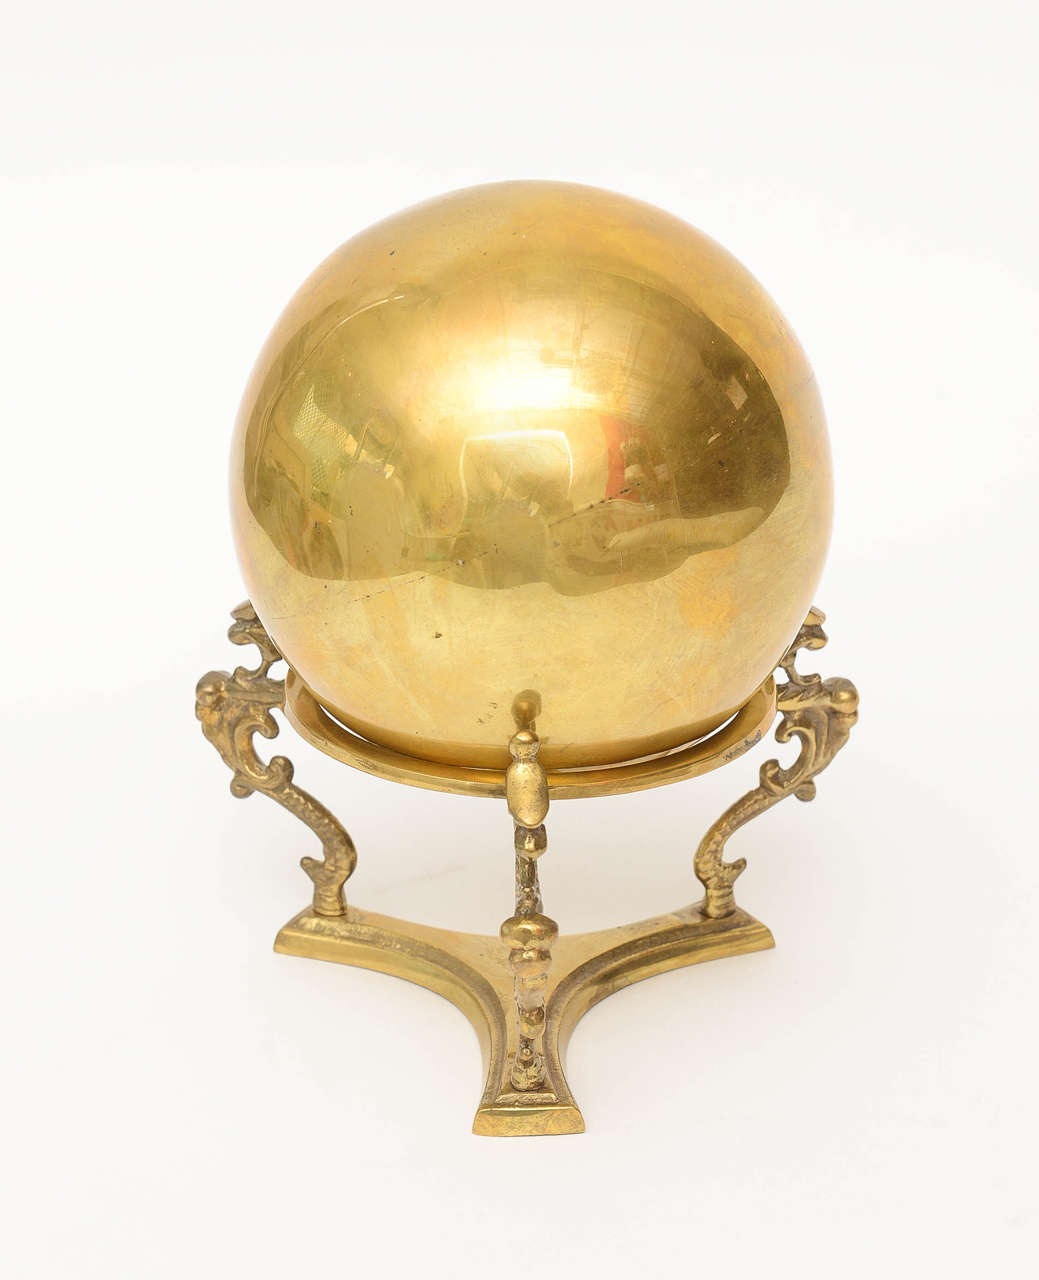 This period delightful and rich looking decorative object for a desk or cocktail table has a bright polished brass ball that sites in a seahorse adorned stand. Looks like a crystal ball in brass!!!

NOTE: THIS WILL BE ON THE SATURDAY SALE FOR 1